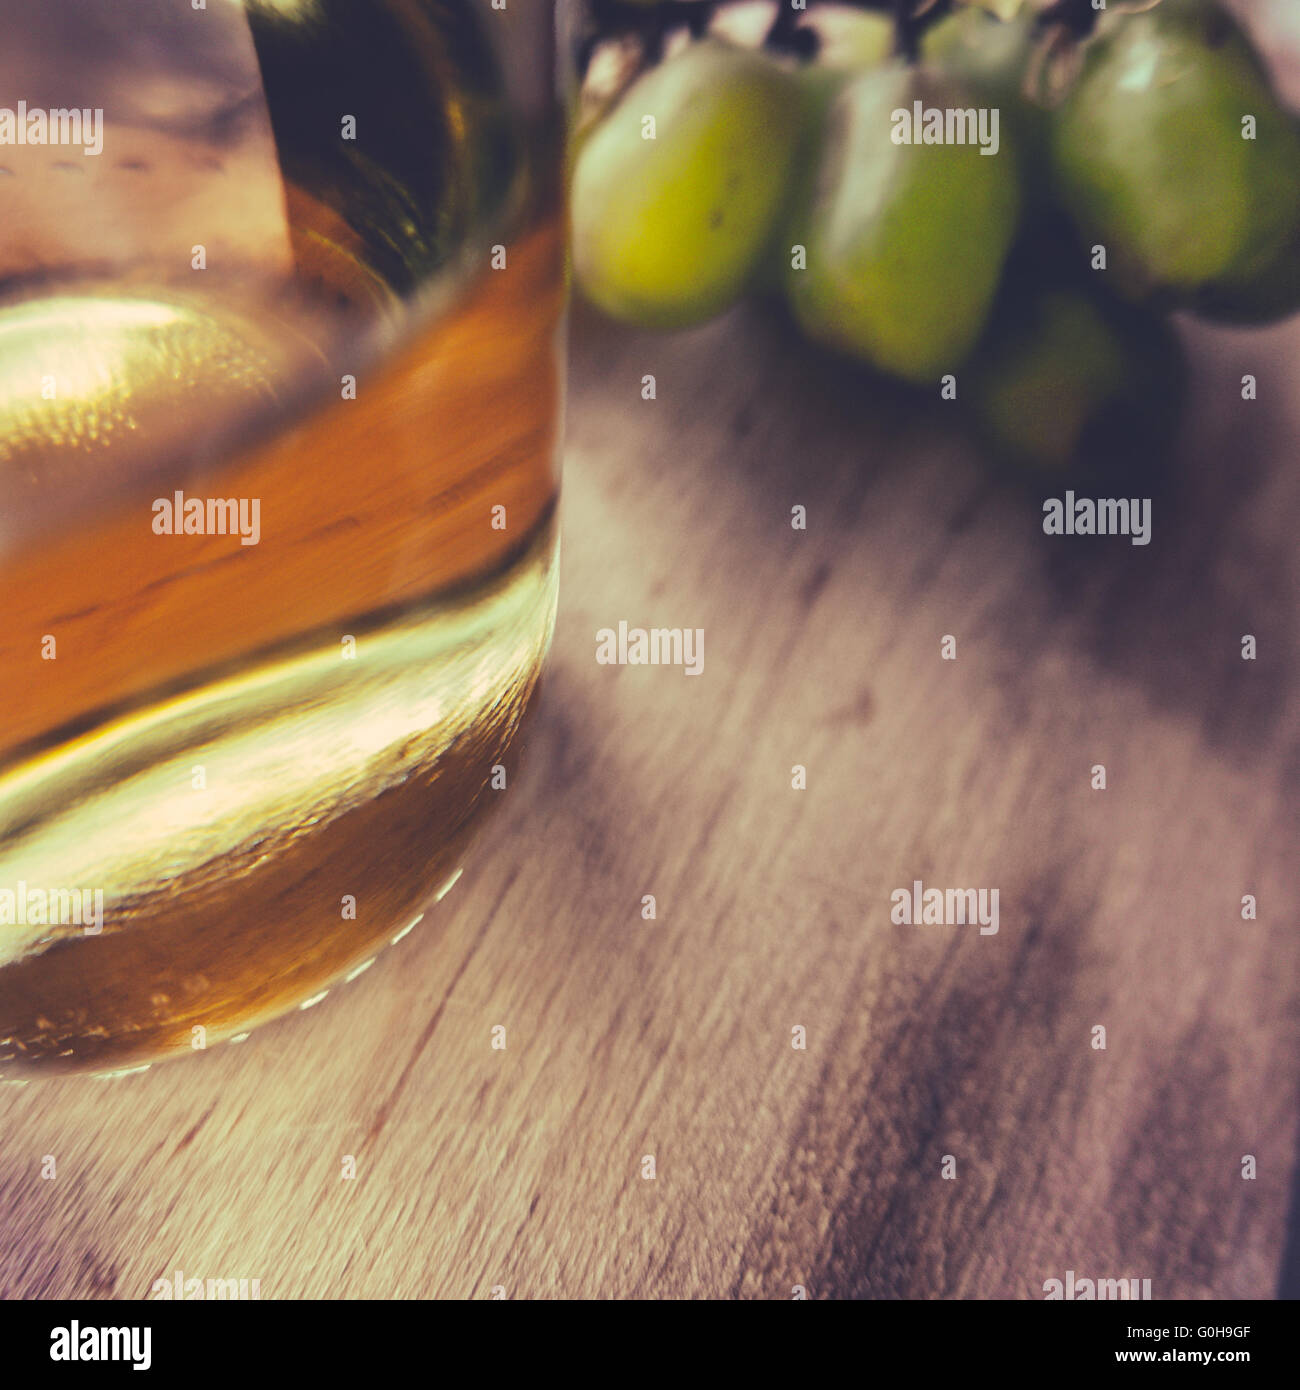 Bottle Of White Wine And Grapes Stock Photo